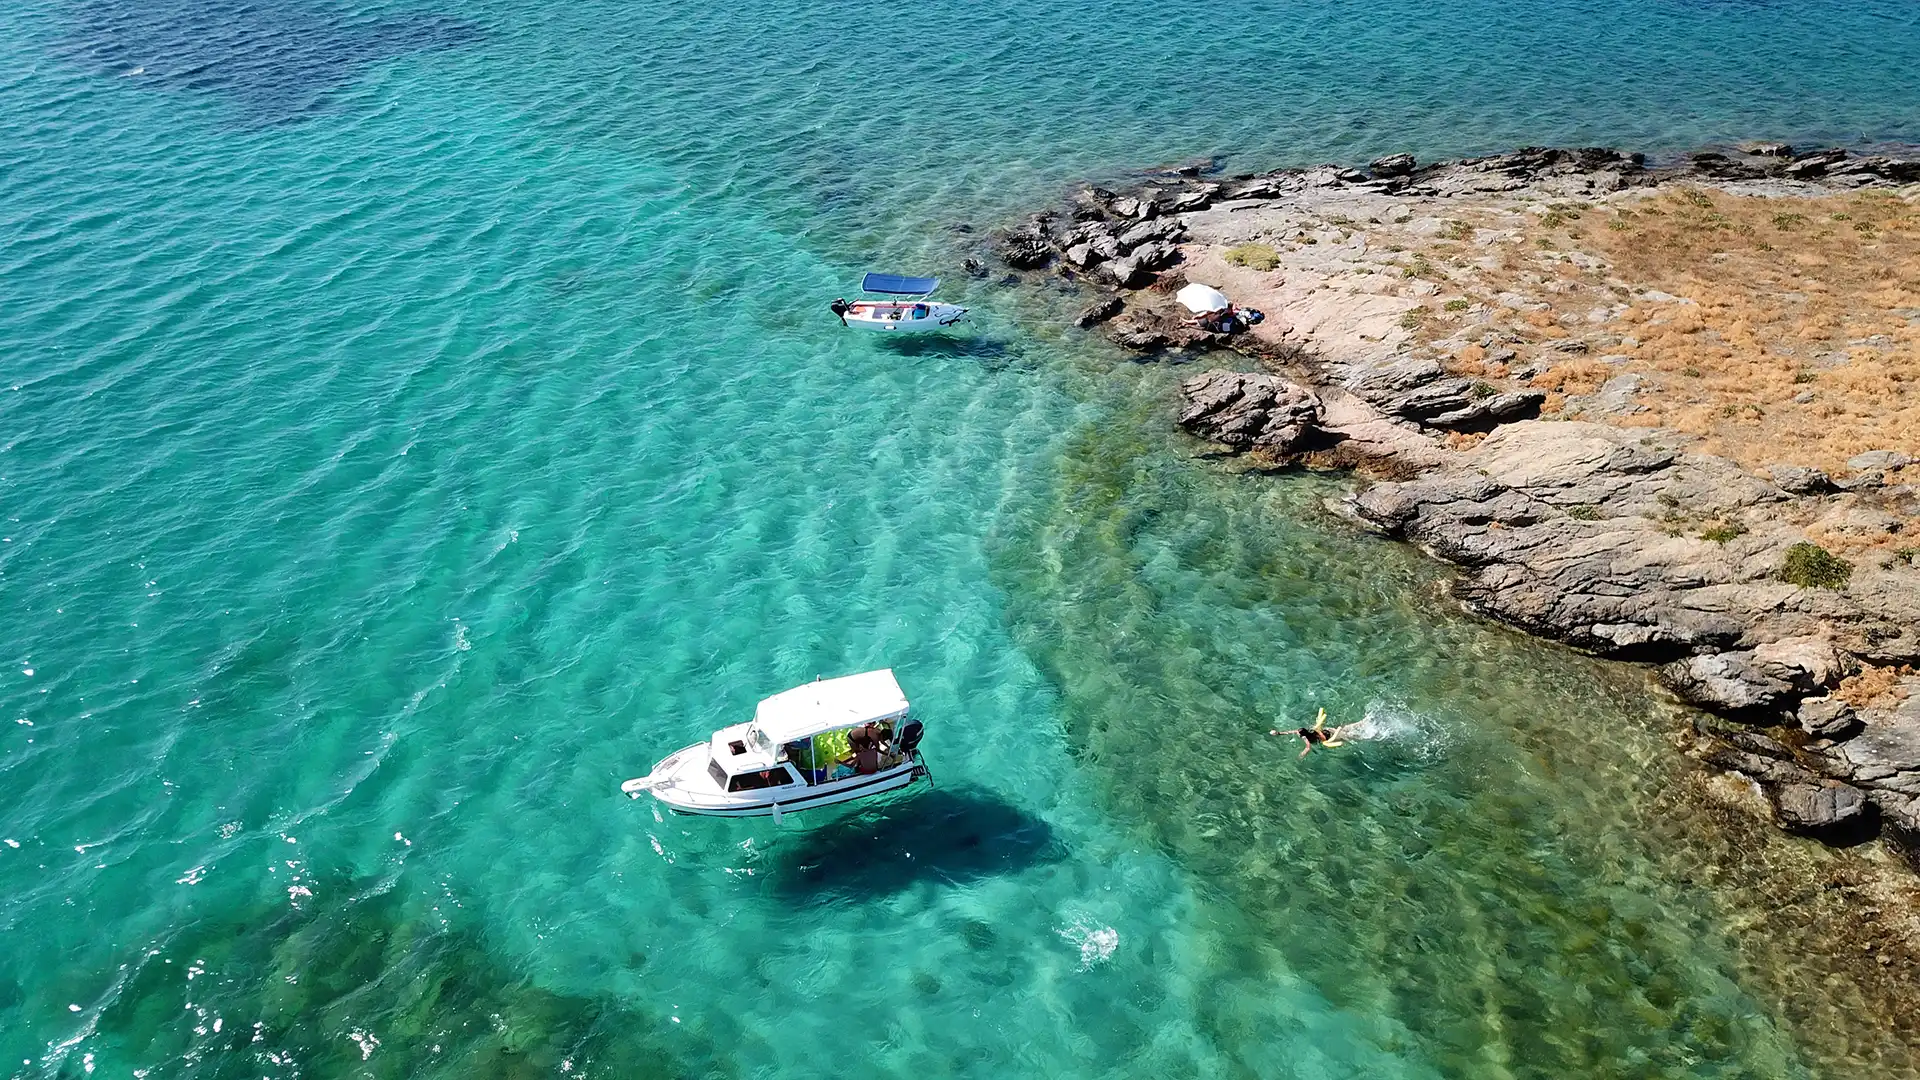 Aerial drone bird's eye view photo from boats docked in turquoise clear water rocky beach in island of Irakleia, Cyclades, Greece